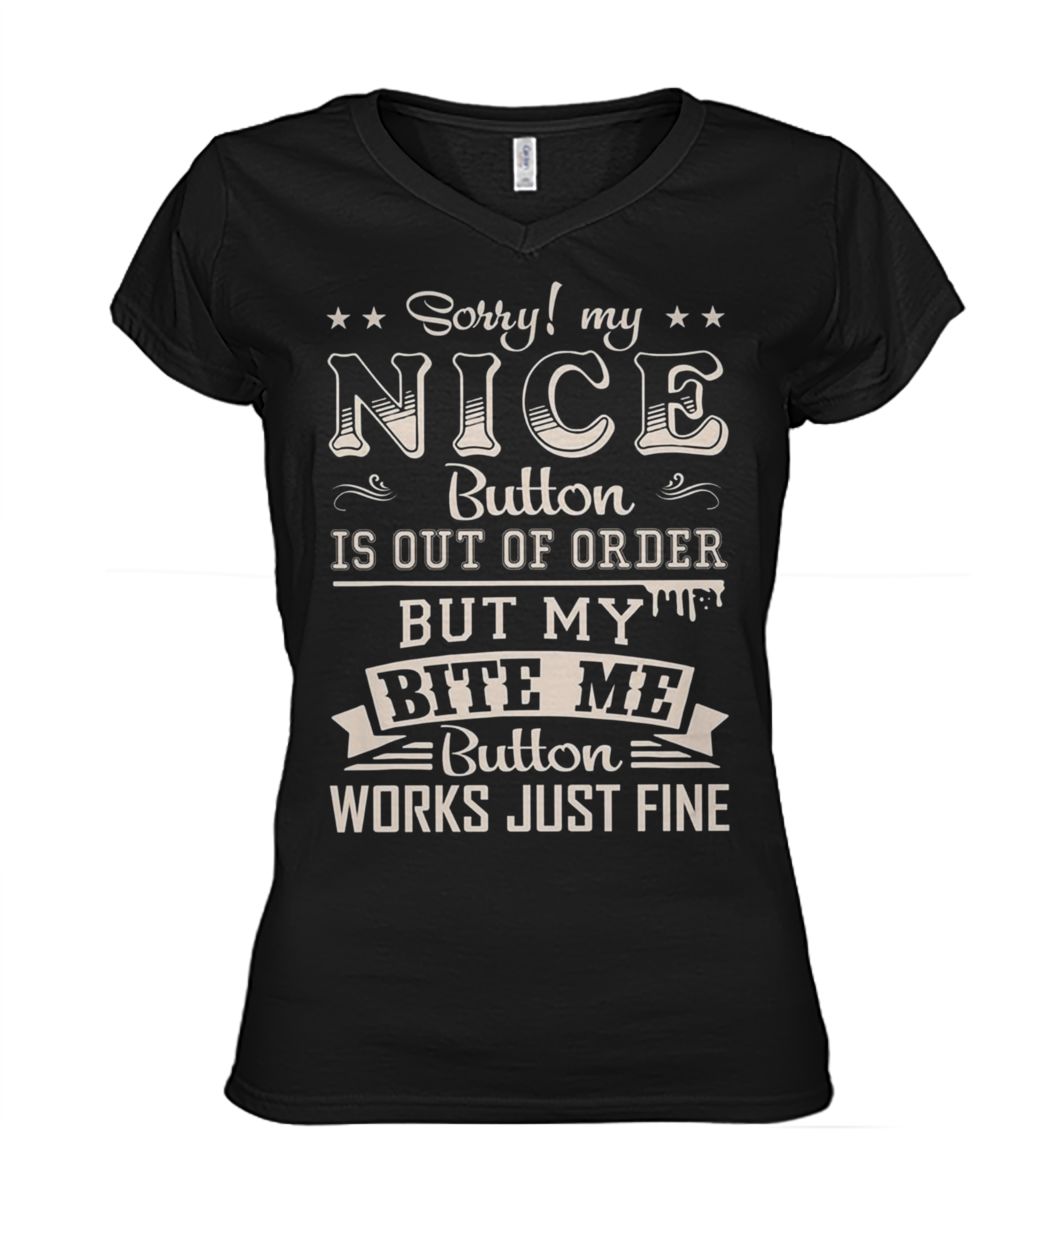 Sorry my nice button out of order but my bite me button works just fine women's v-neck